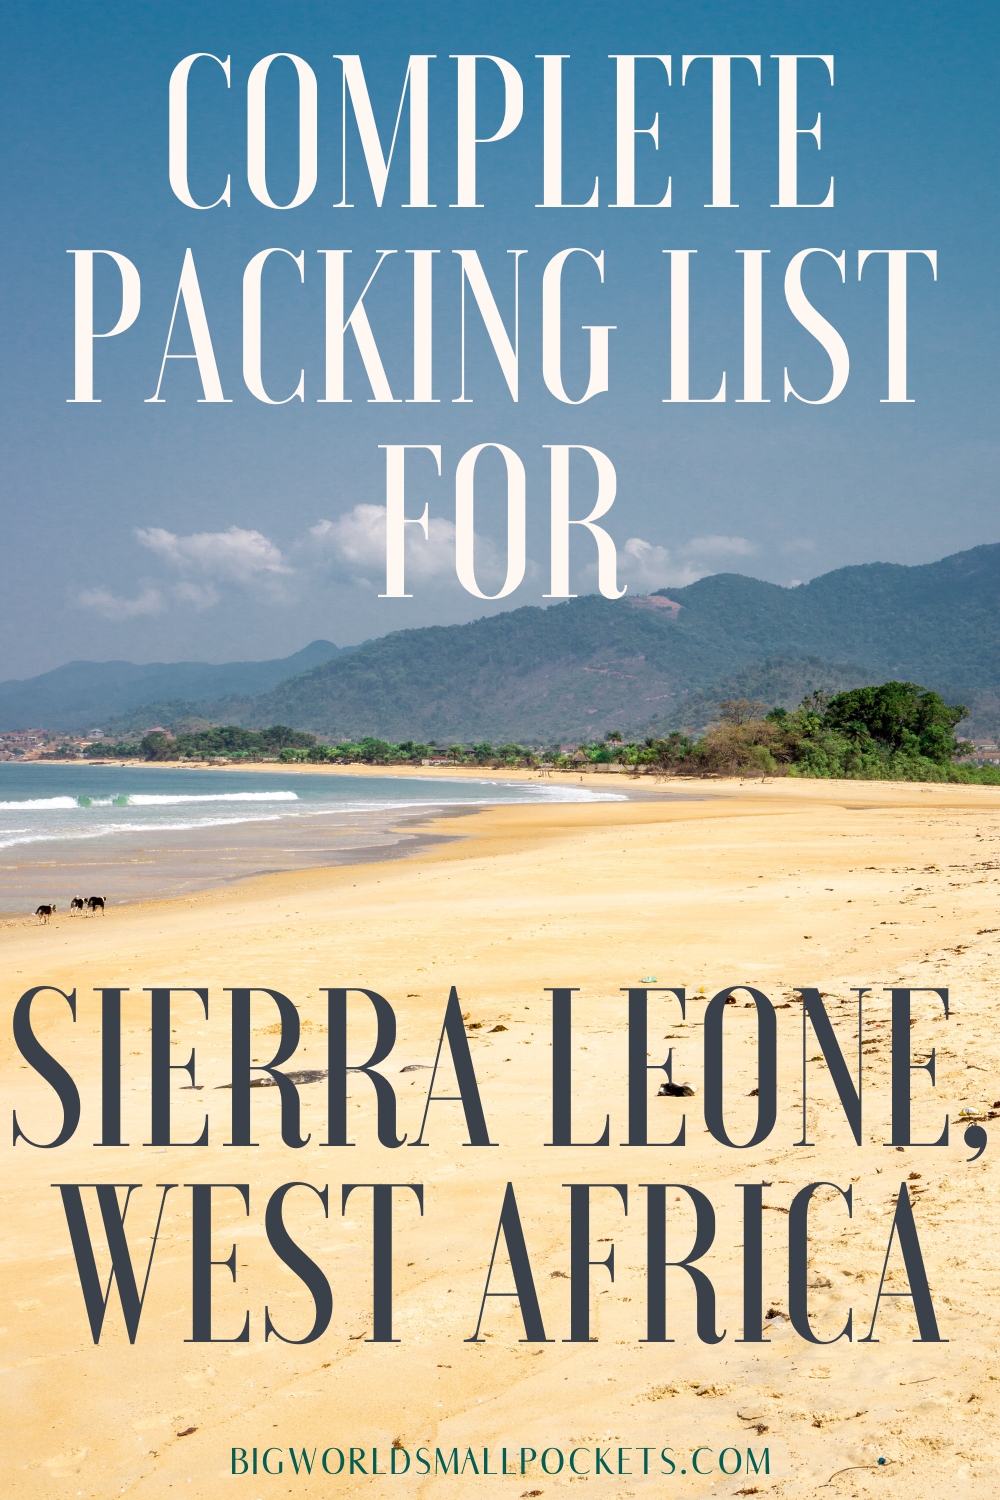 Complete Packing List for Sierra Leone